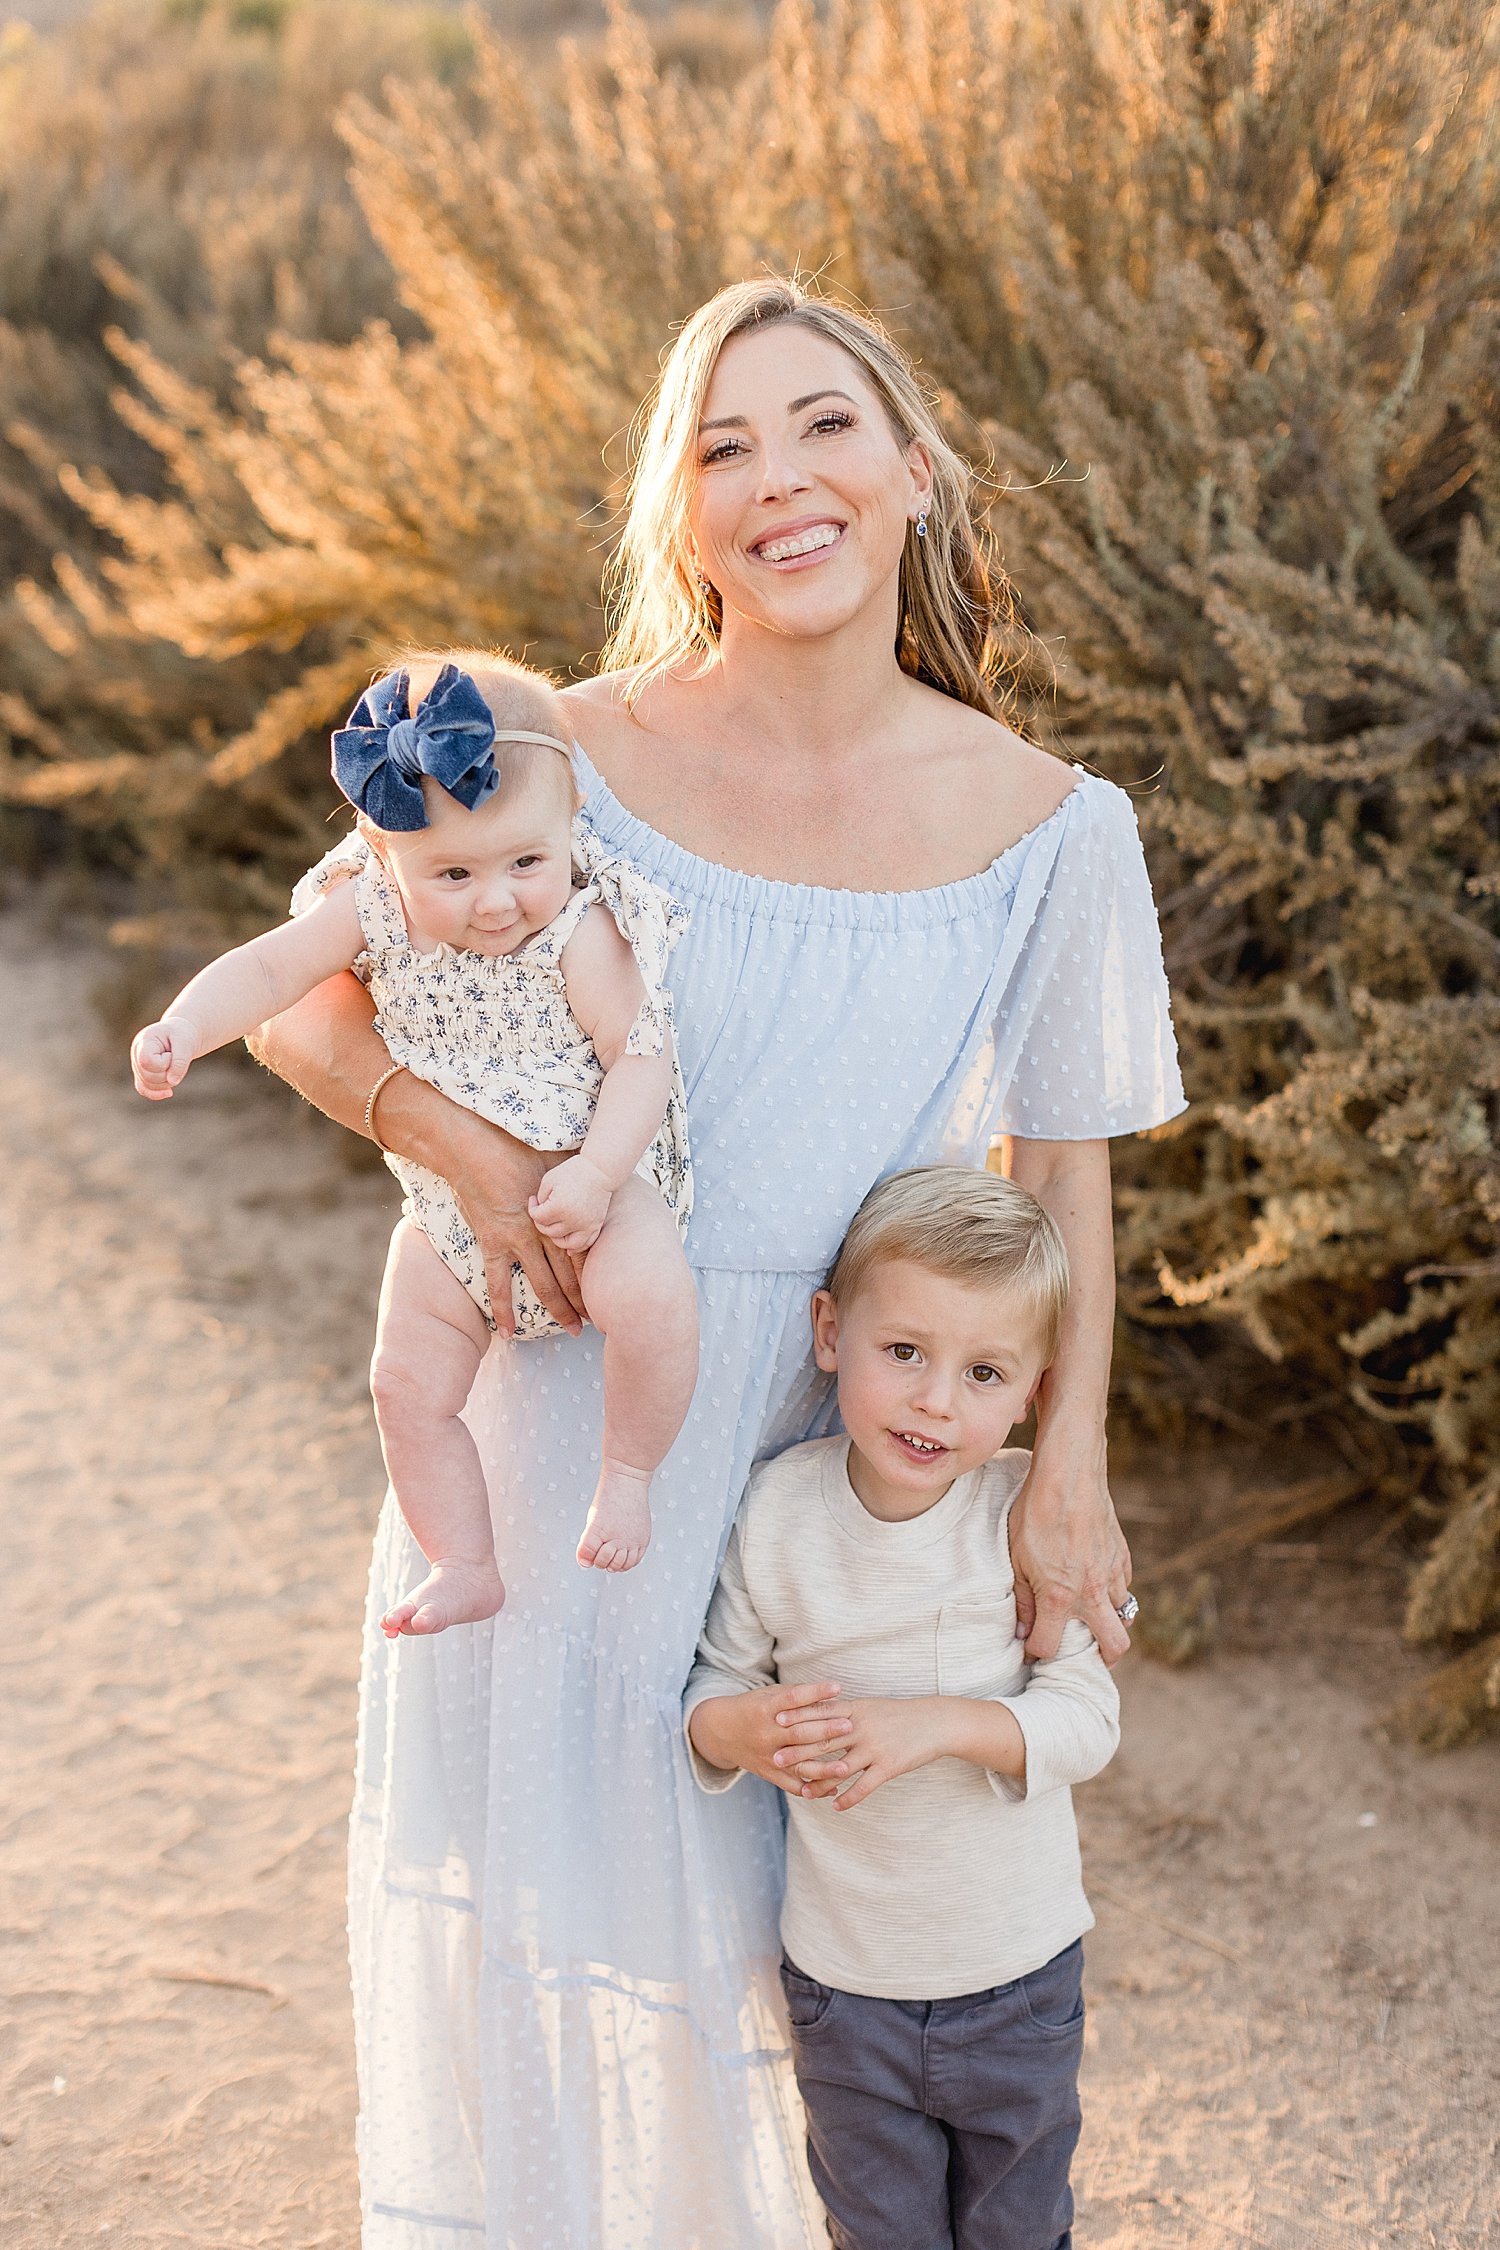 Mom with her son and daughter | Ambre Williams Photography